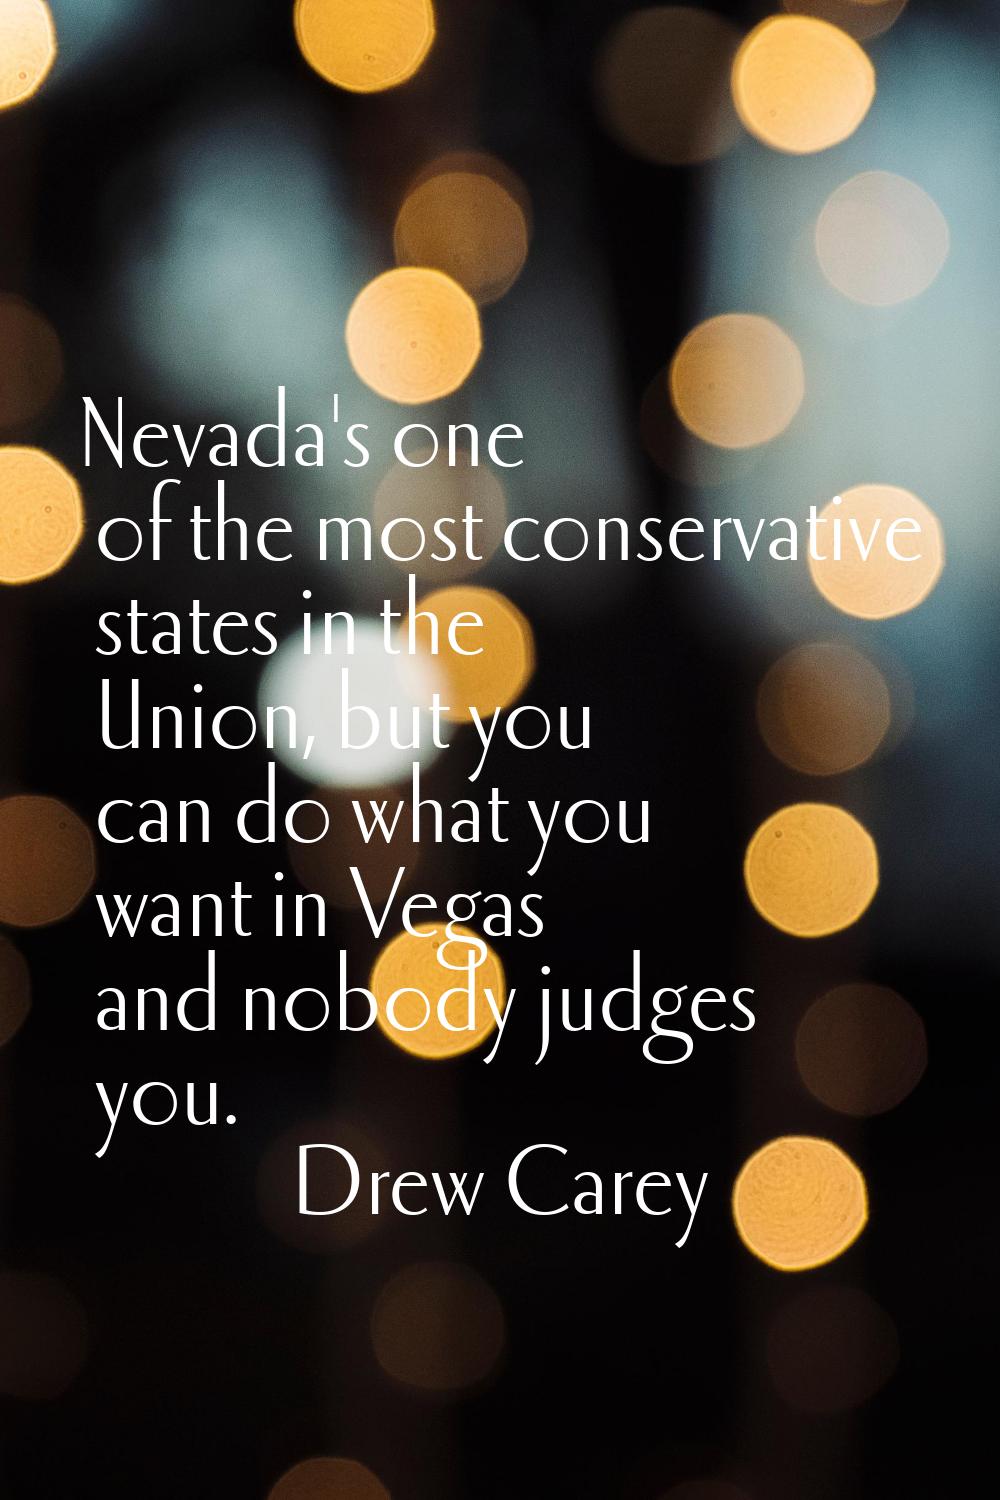 Nevada's one of the most conservative states in the Union, but you can do what you want in Vegas an